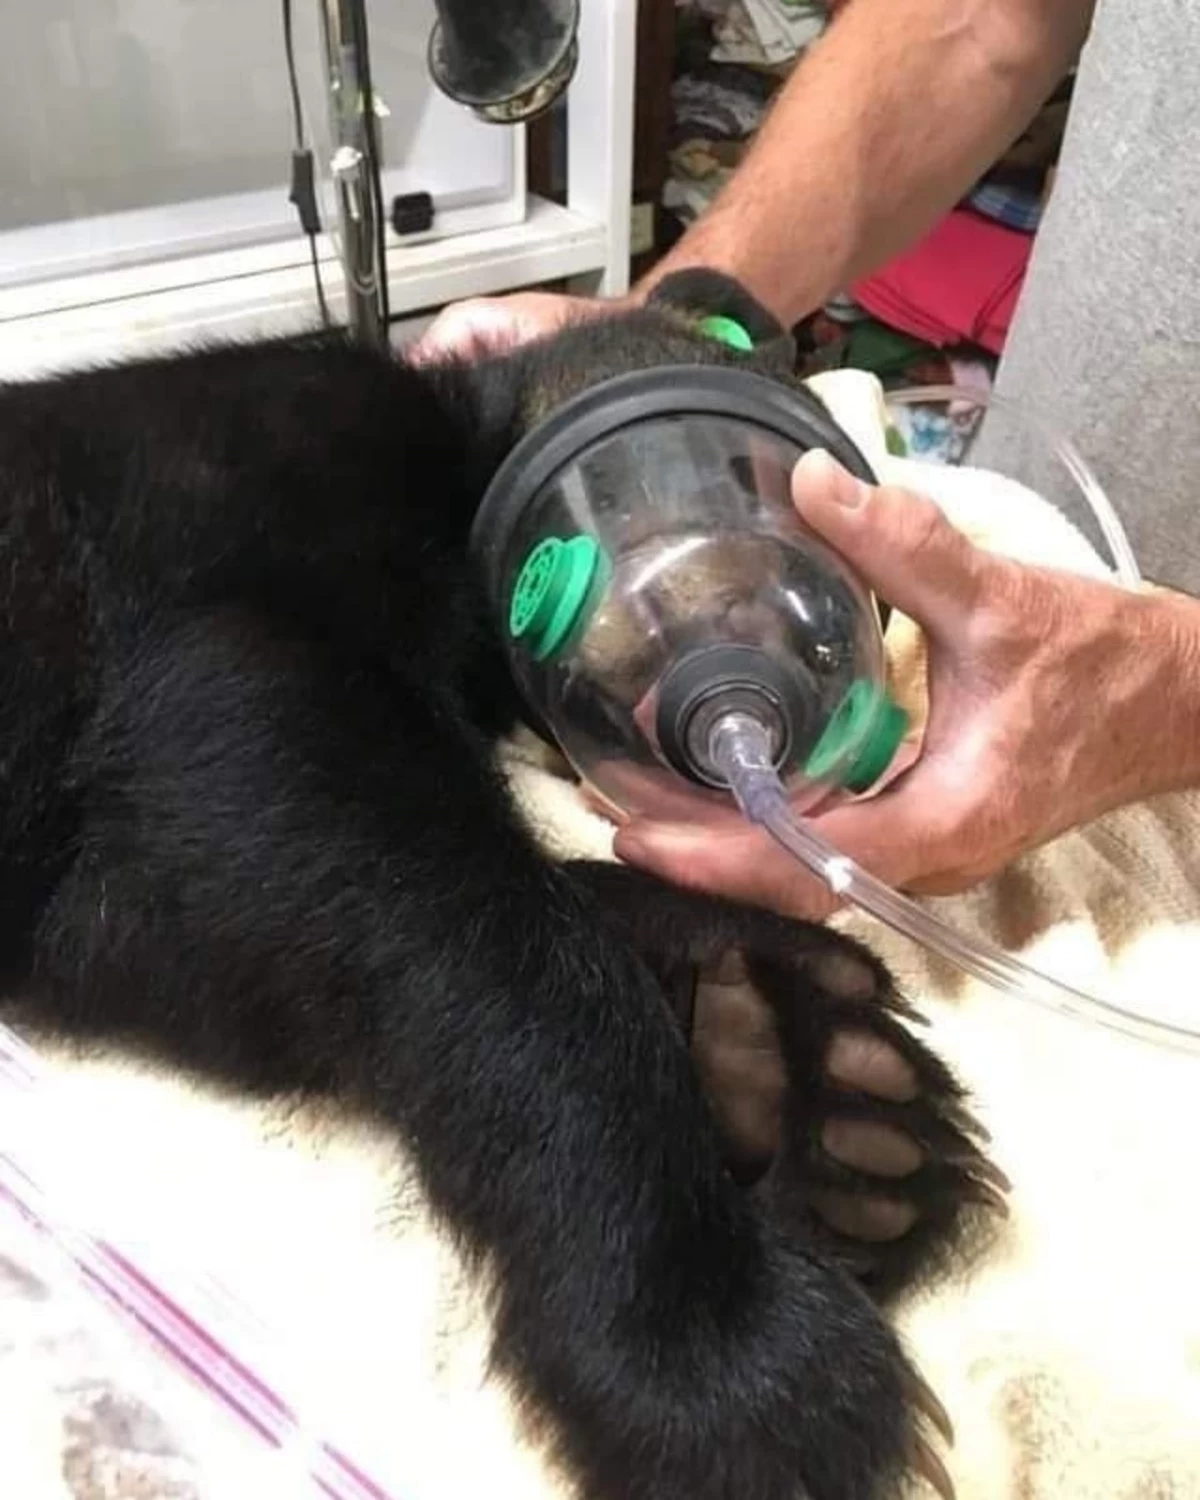 Injured Bear Cub Was Saved By Wildlife Rescue In New York